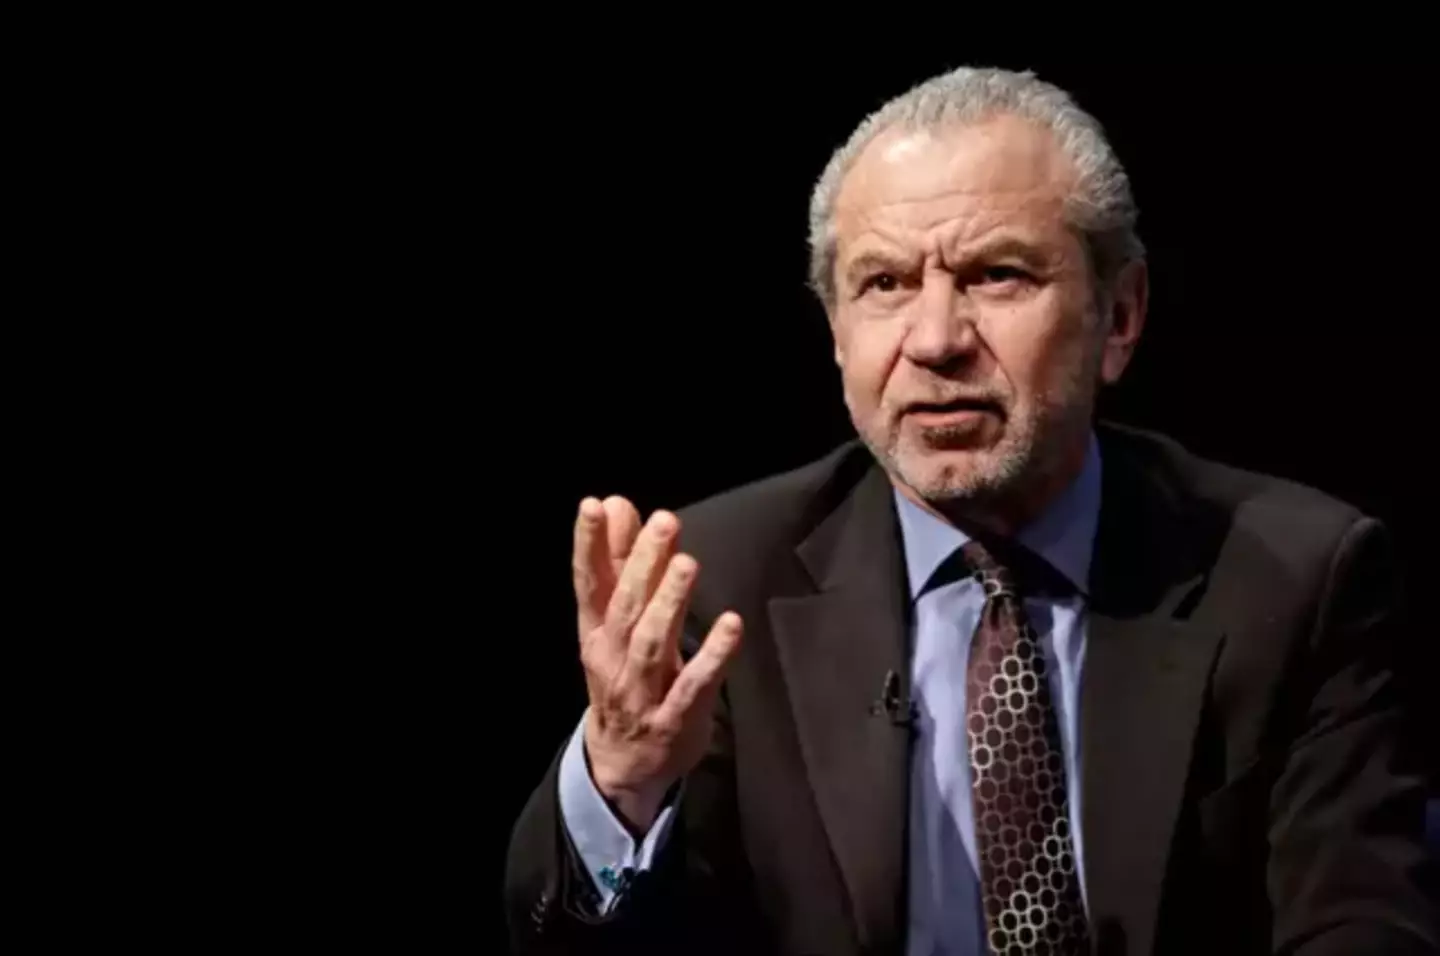 People want the BBC to take action against Lord Sugar after the Gary Lineker scandal.